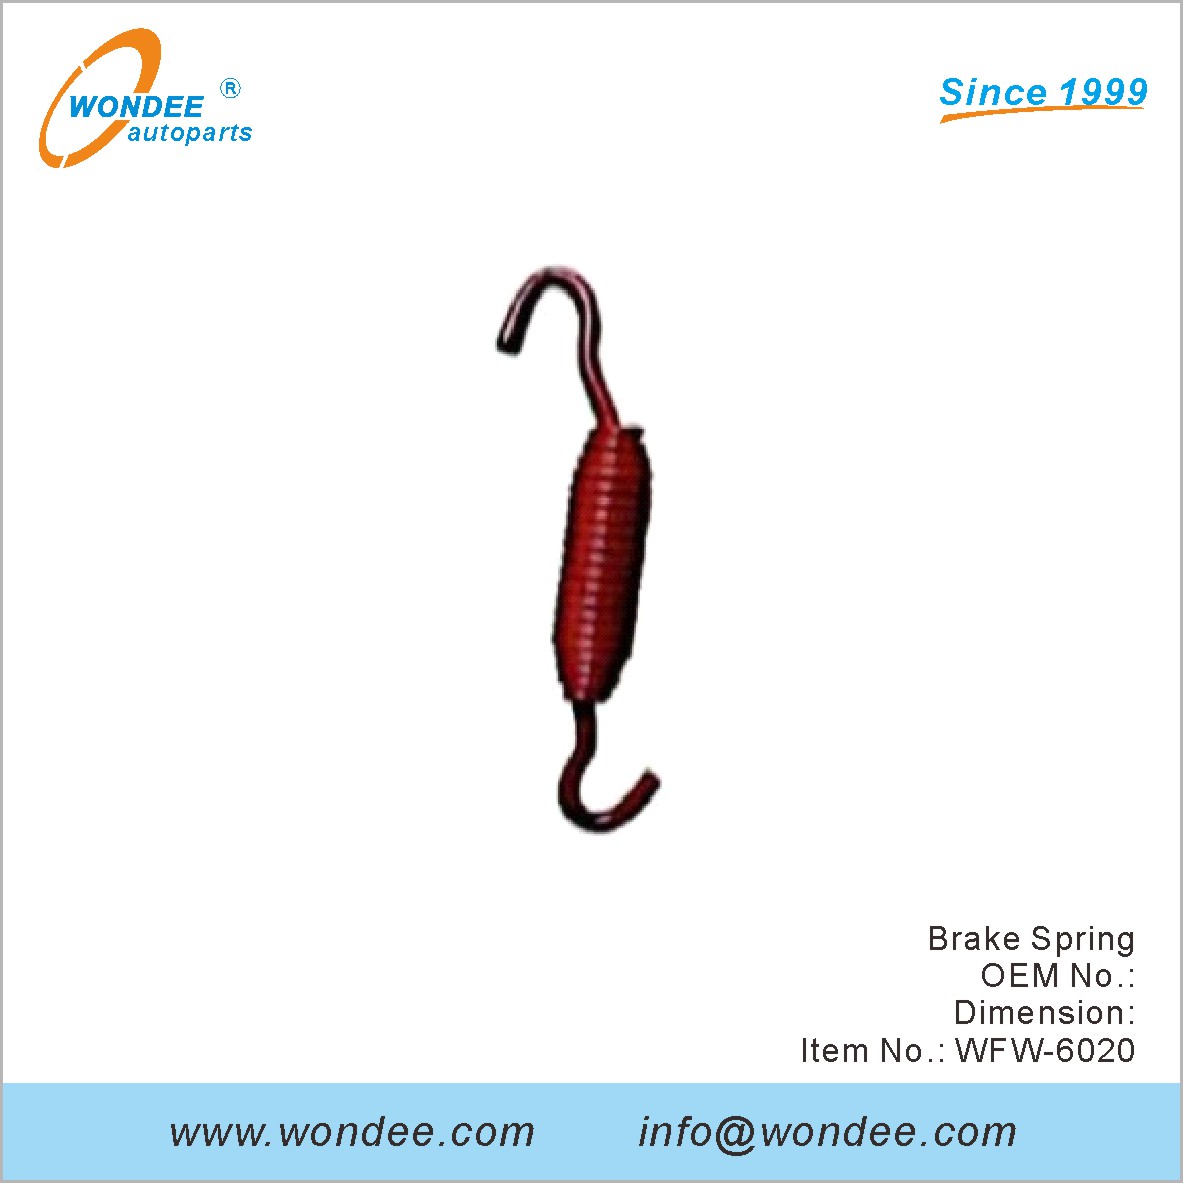 Brake Spring OEM for FUWA from WONDEE